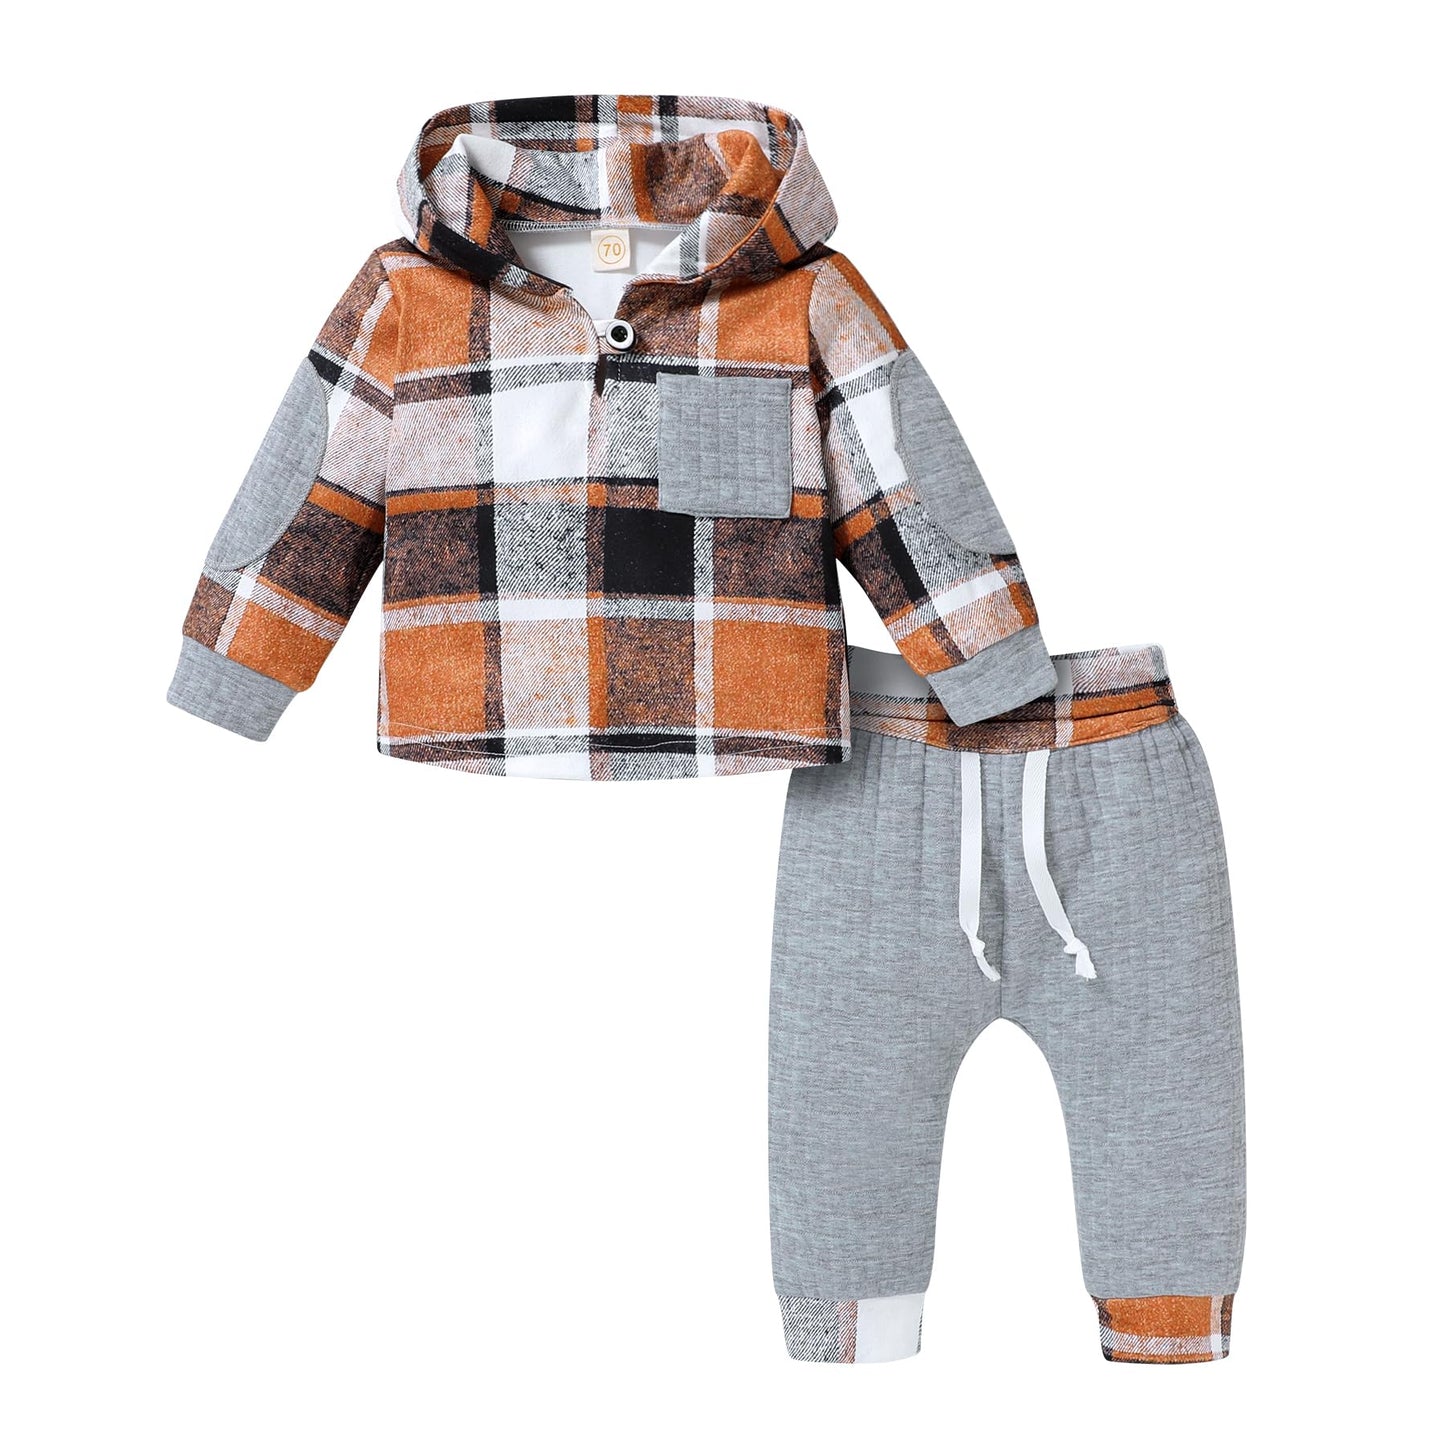 Kids Toddler Infant Baby Boys Girls Winter Outfit Christmas Plaid Hoodie Sweatshirt Jackets Shirt+Pants Xmas Clothes Set 0-3M